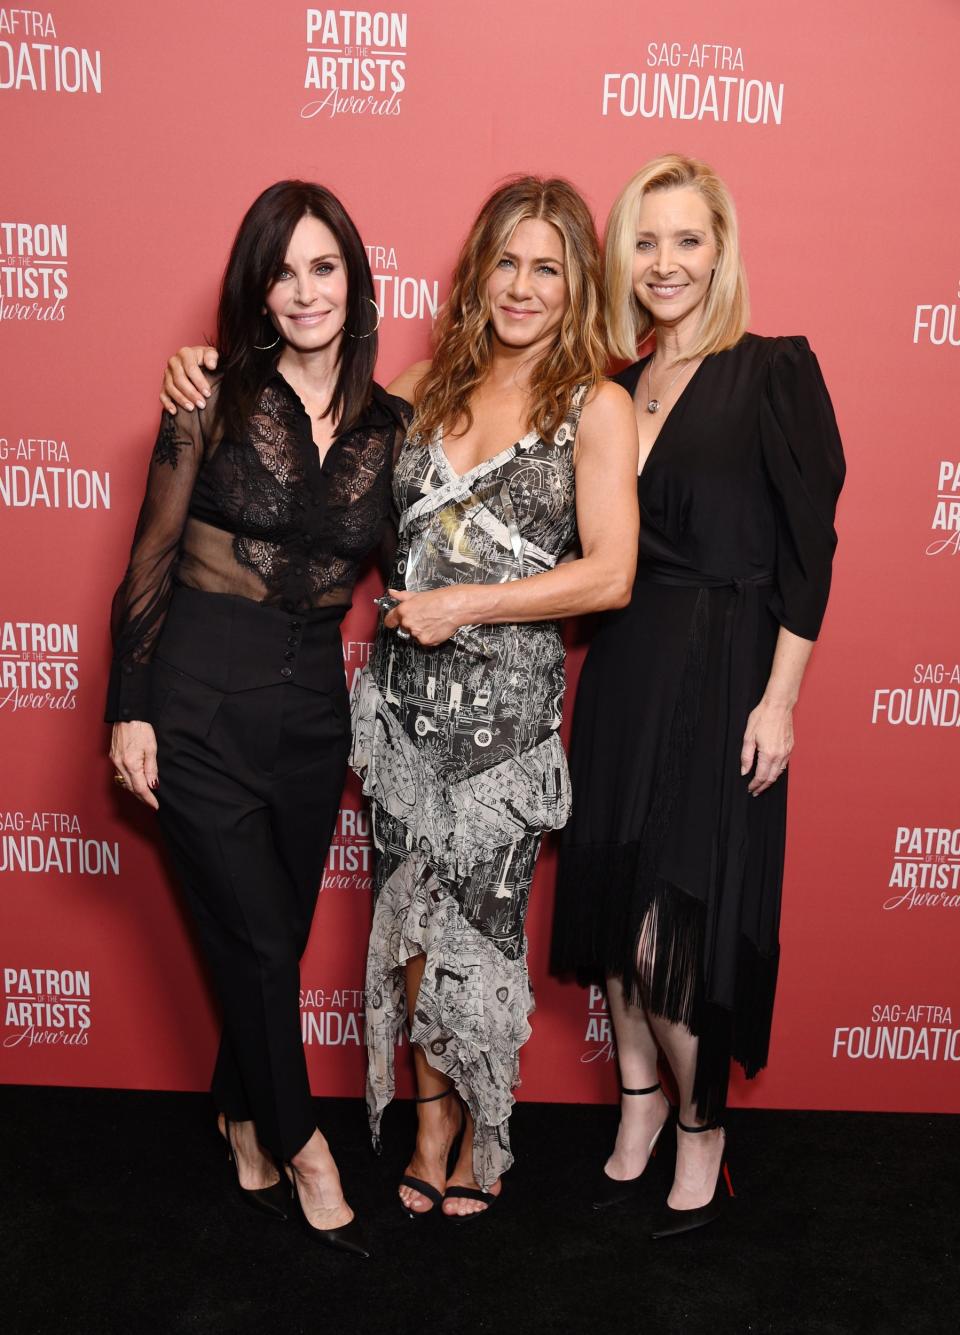 Still friends: The famous trio reunited at the event (Getty Images for SAG-AFTRA Found)